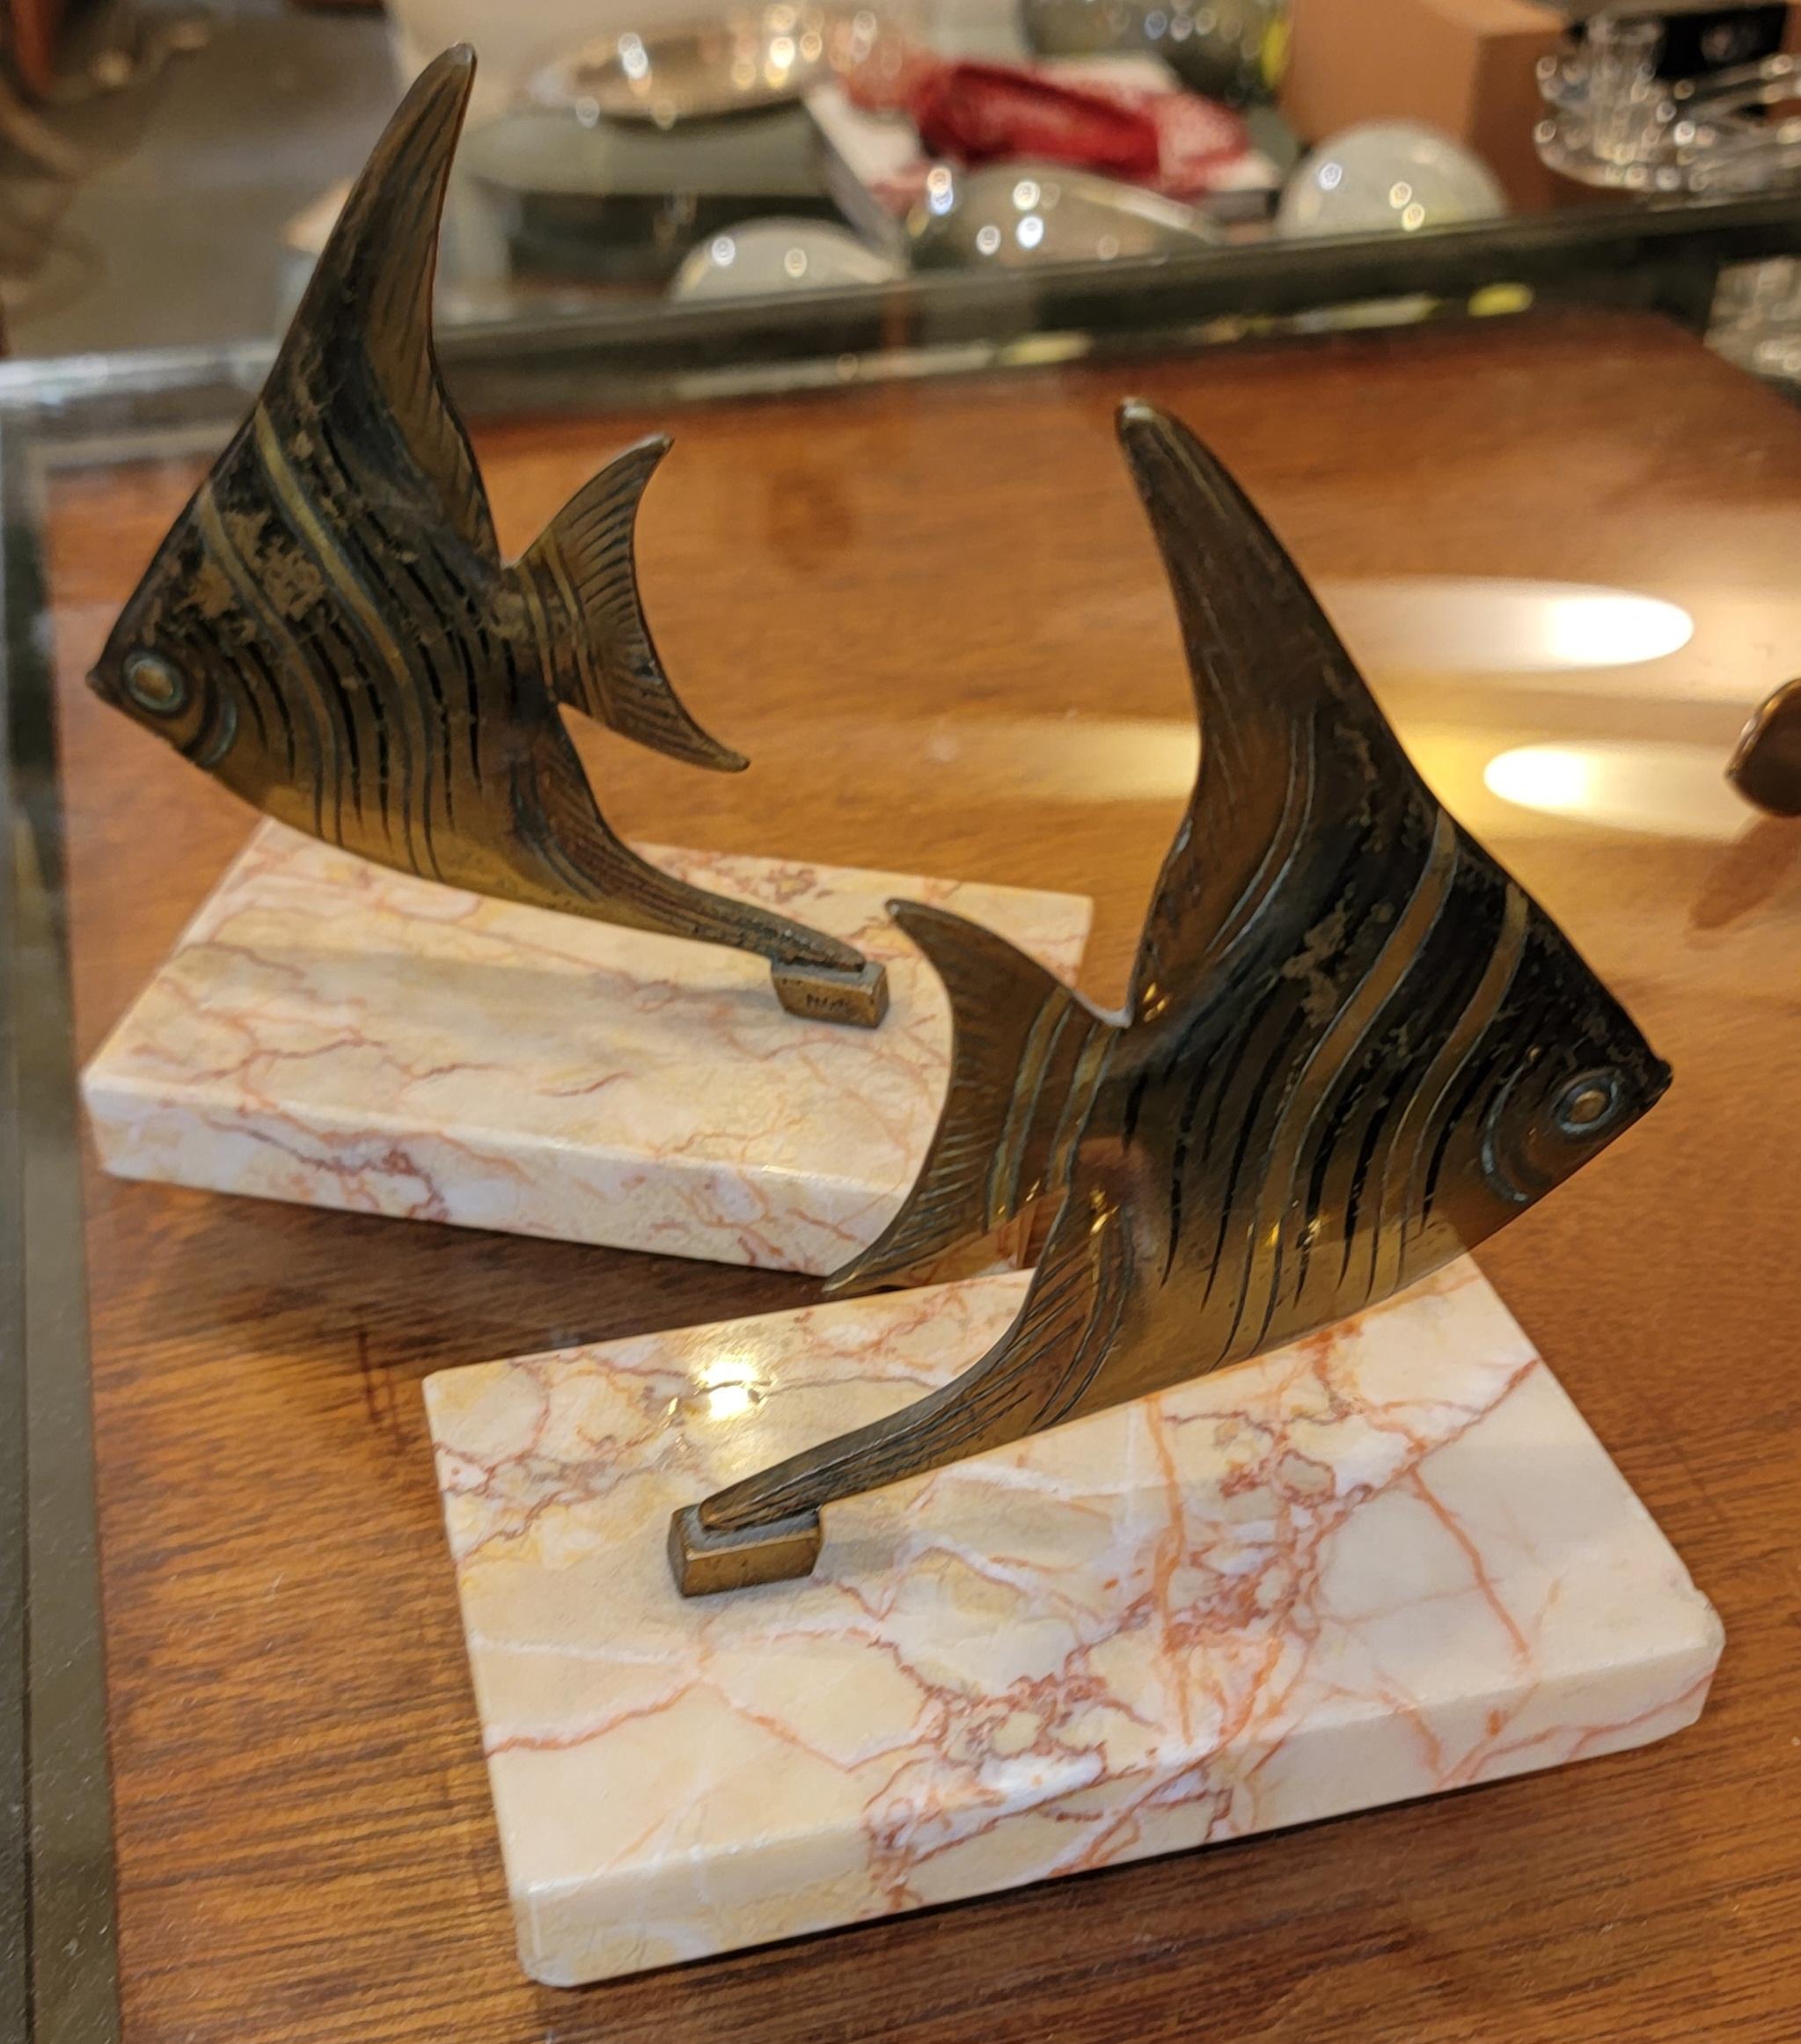 Pair of fish bookends with marble pinkish base and brass angel fish. Measures approx - 3.25deep x 5 wide x 6.25 high.